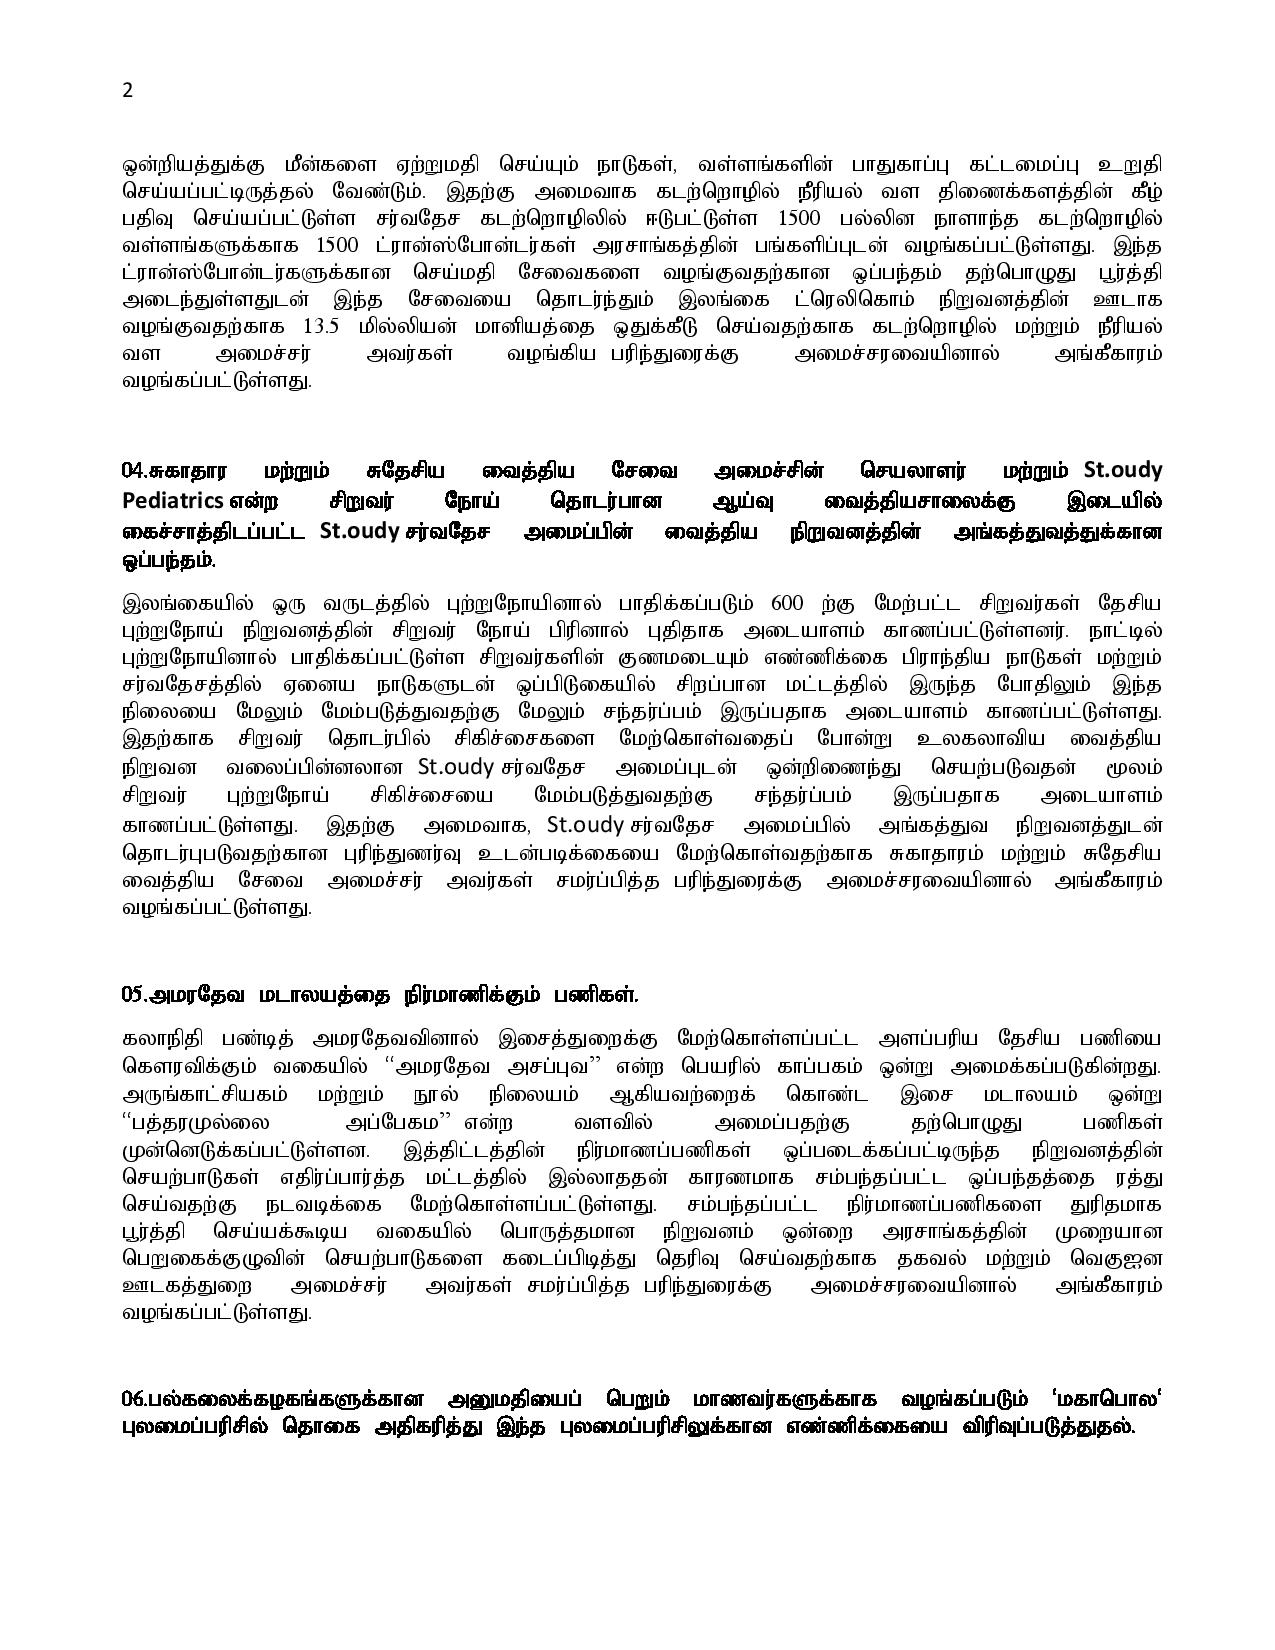 2020.02.27 cabinet tamil page 002